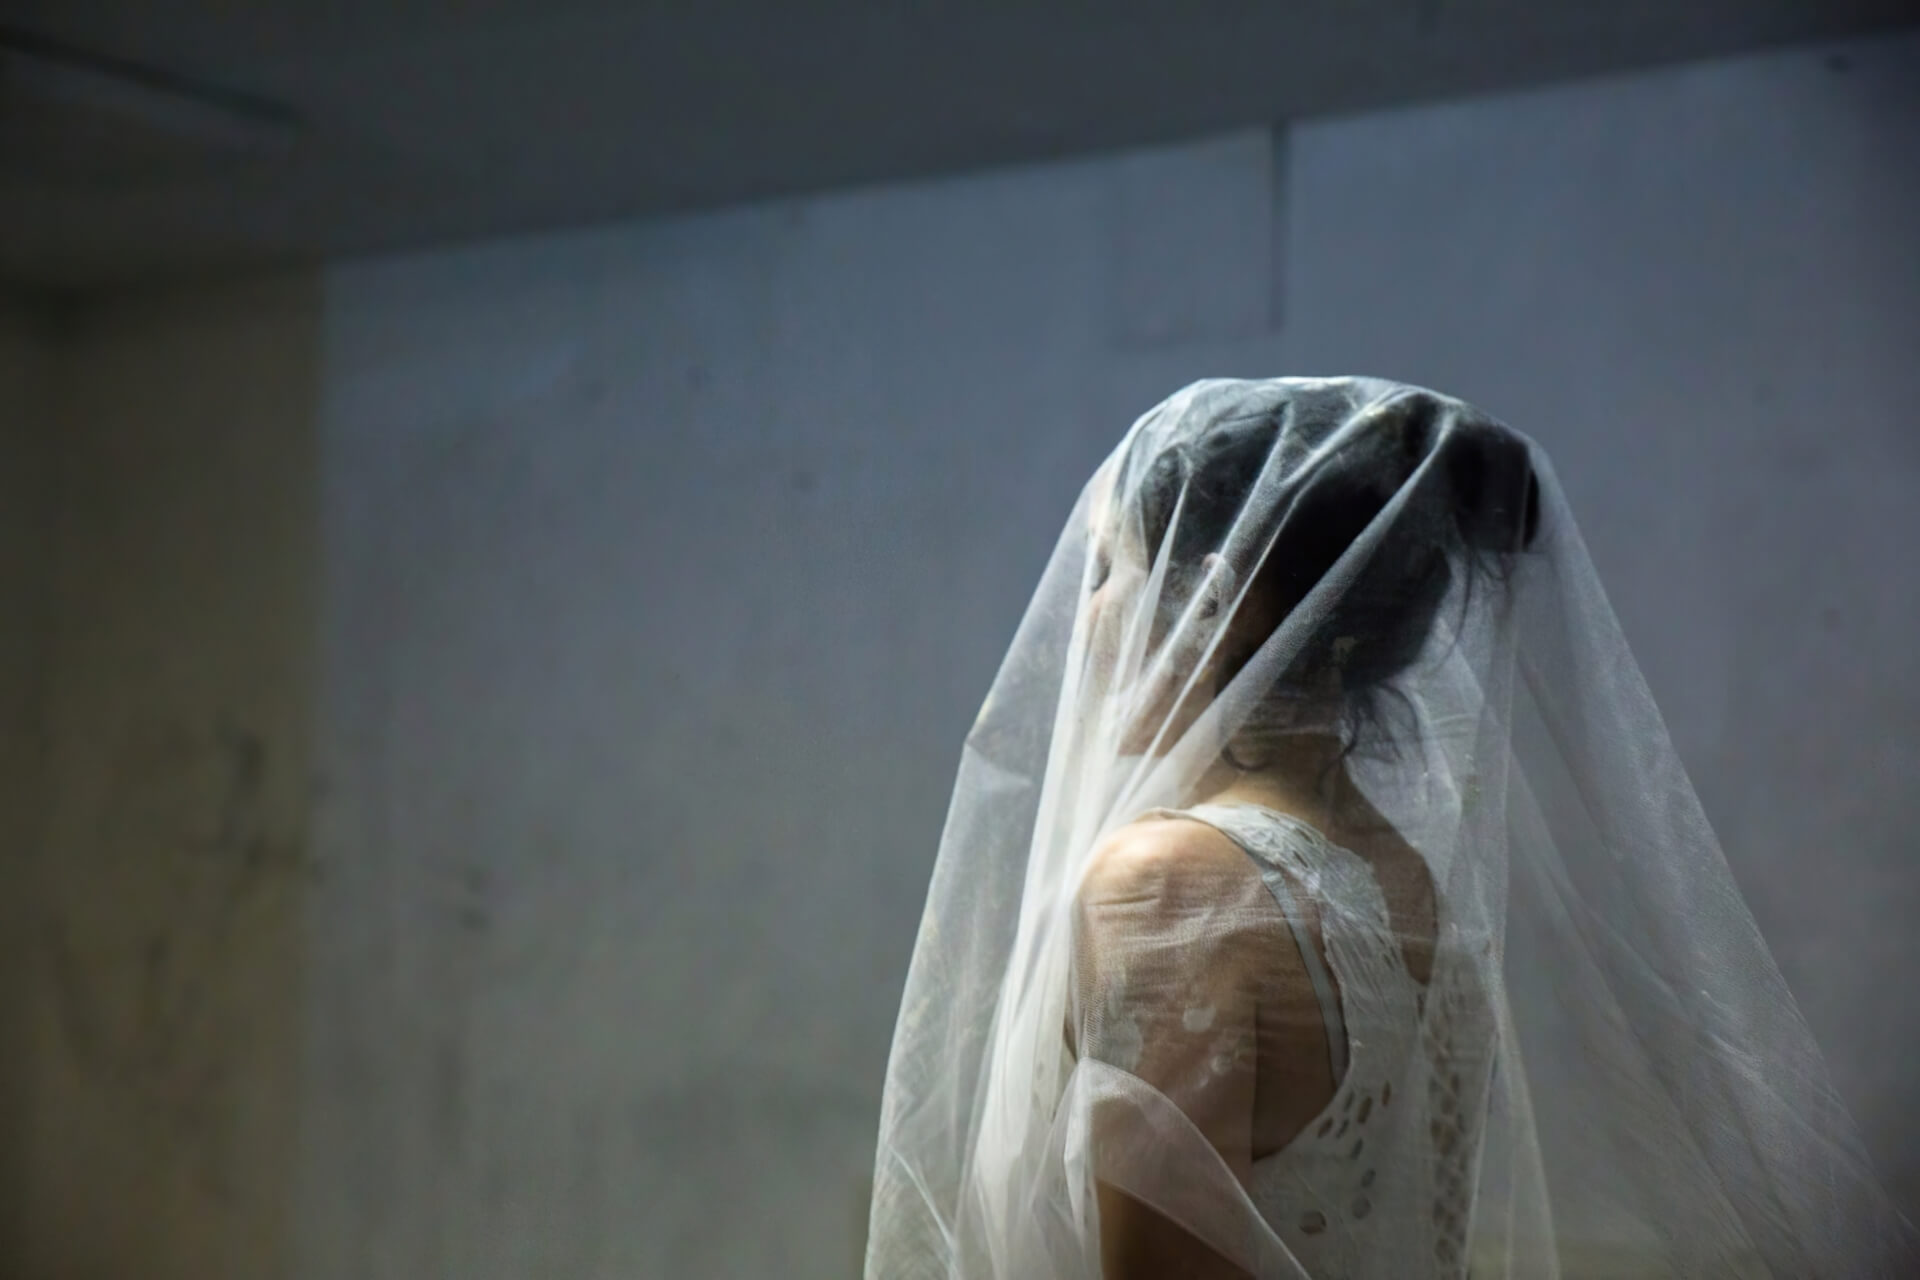 A medium shot of a performer wearing a white dress and a sheer white veil over the head.